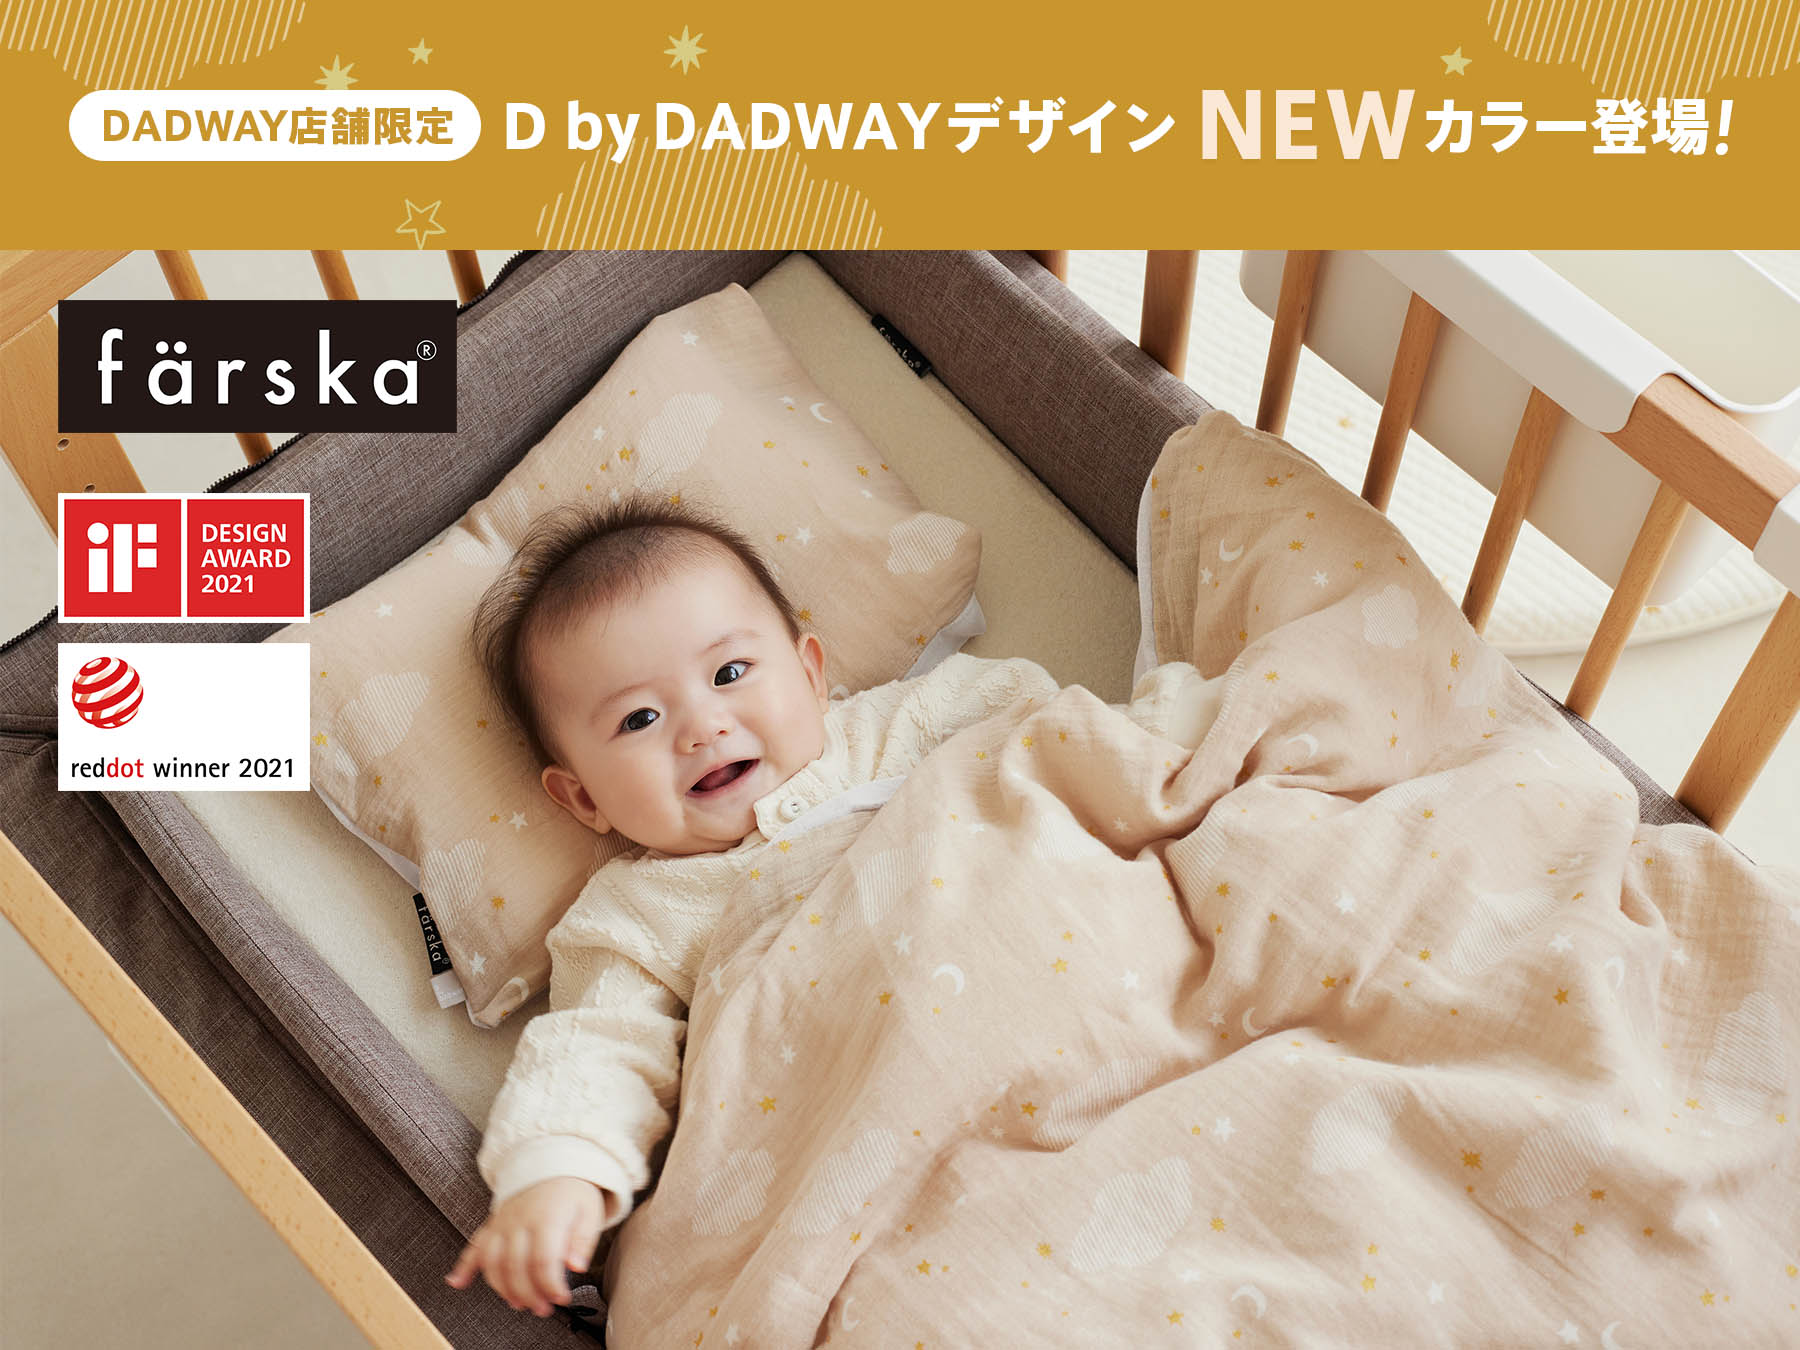 CompactBed Free DADWAY限定カラーが登場！